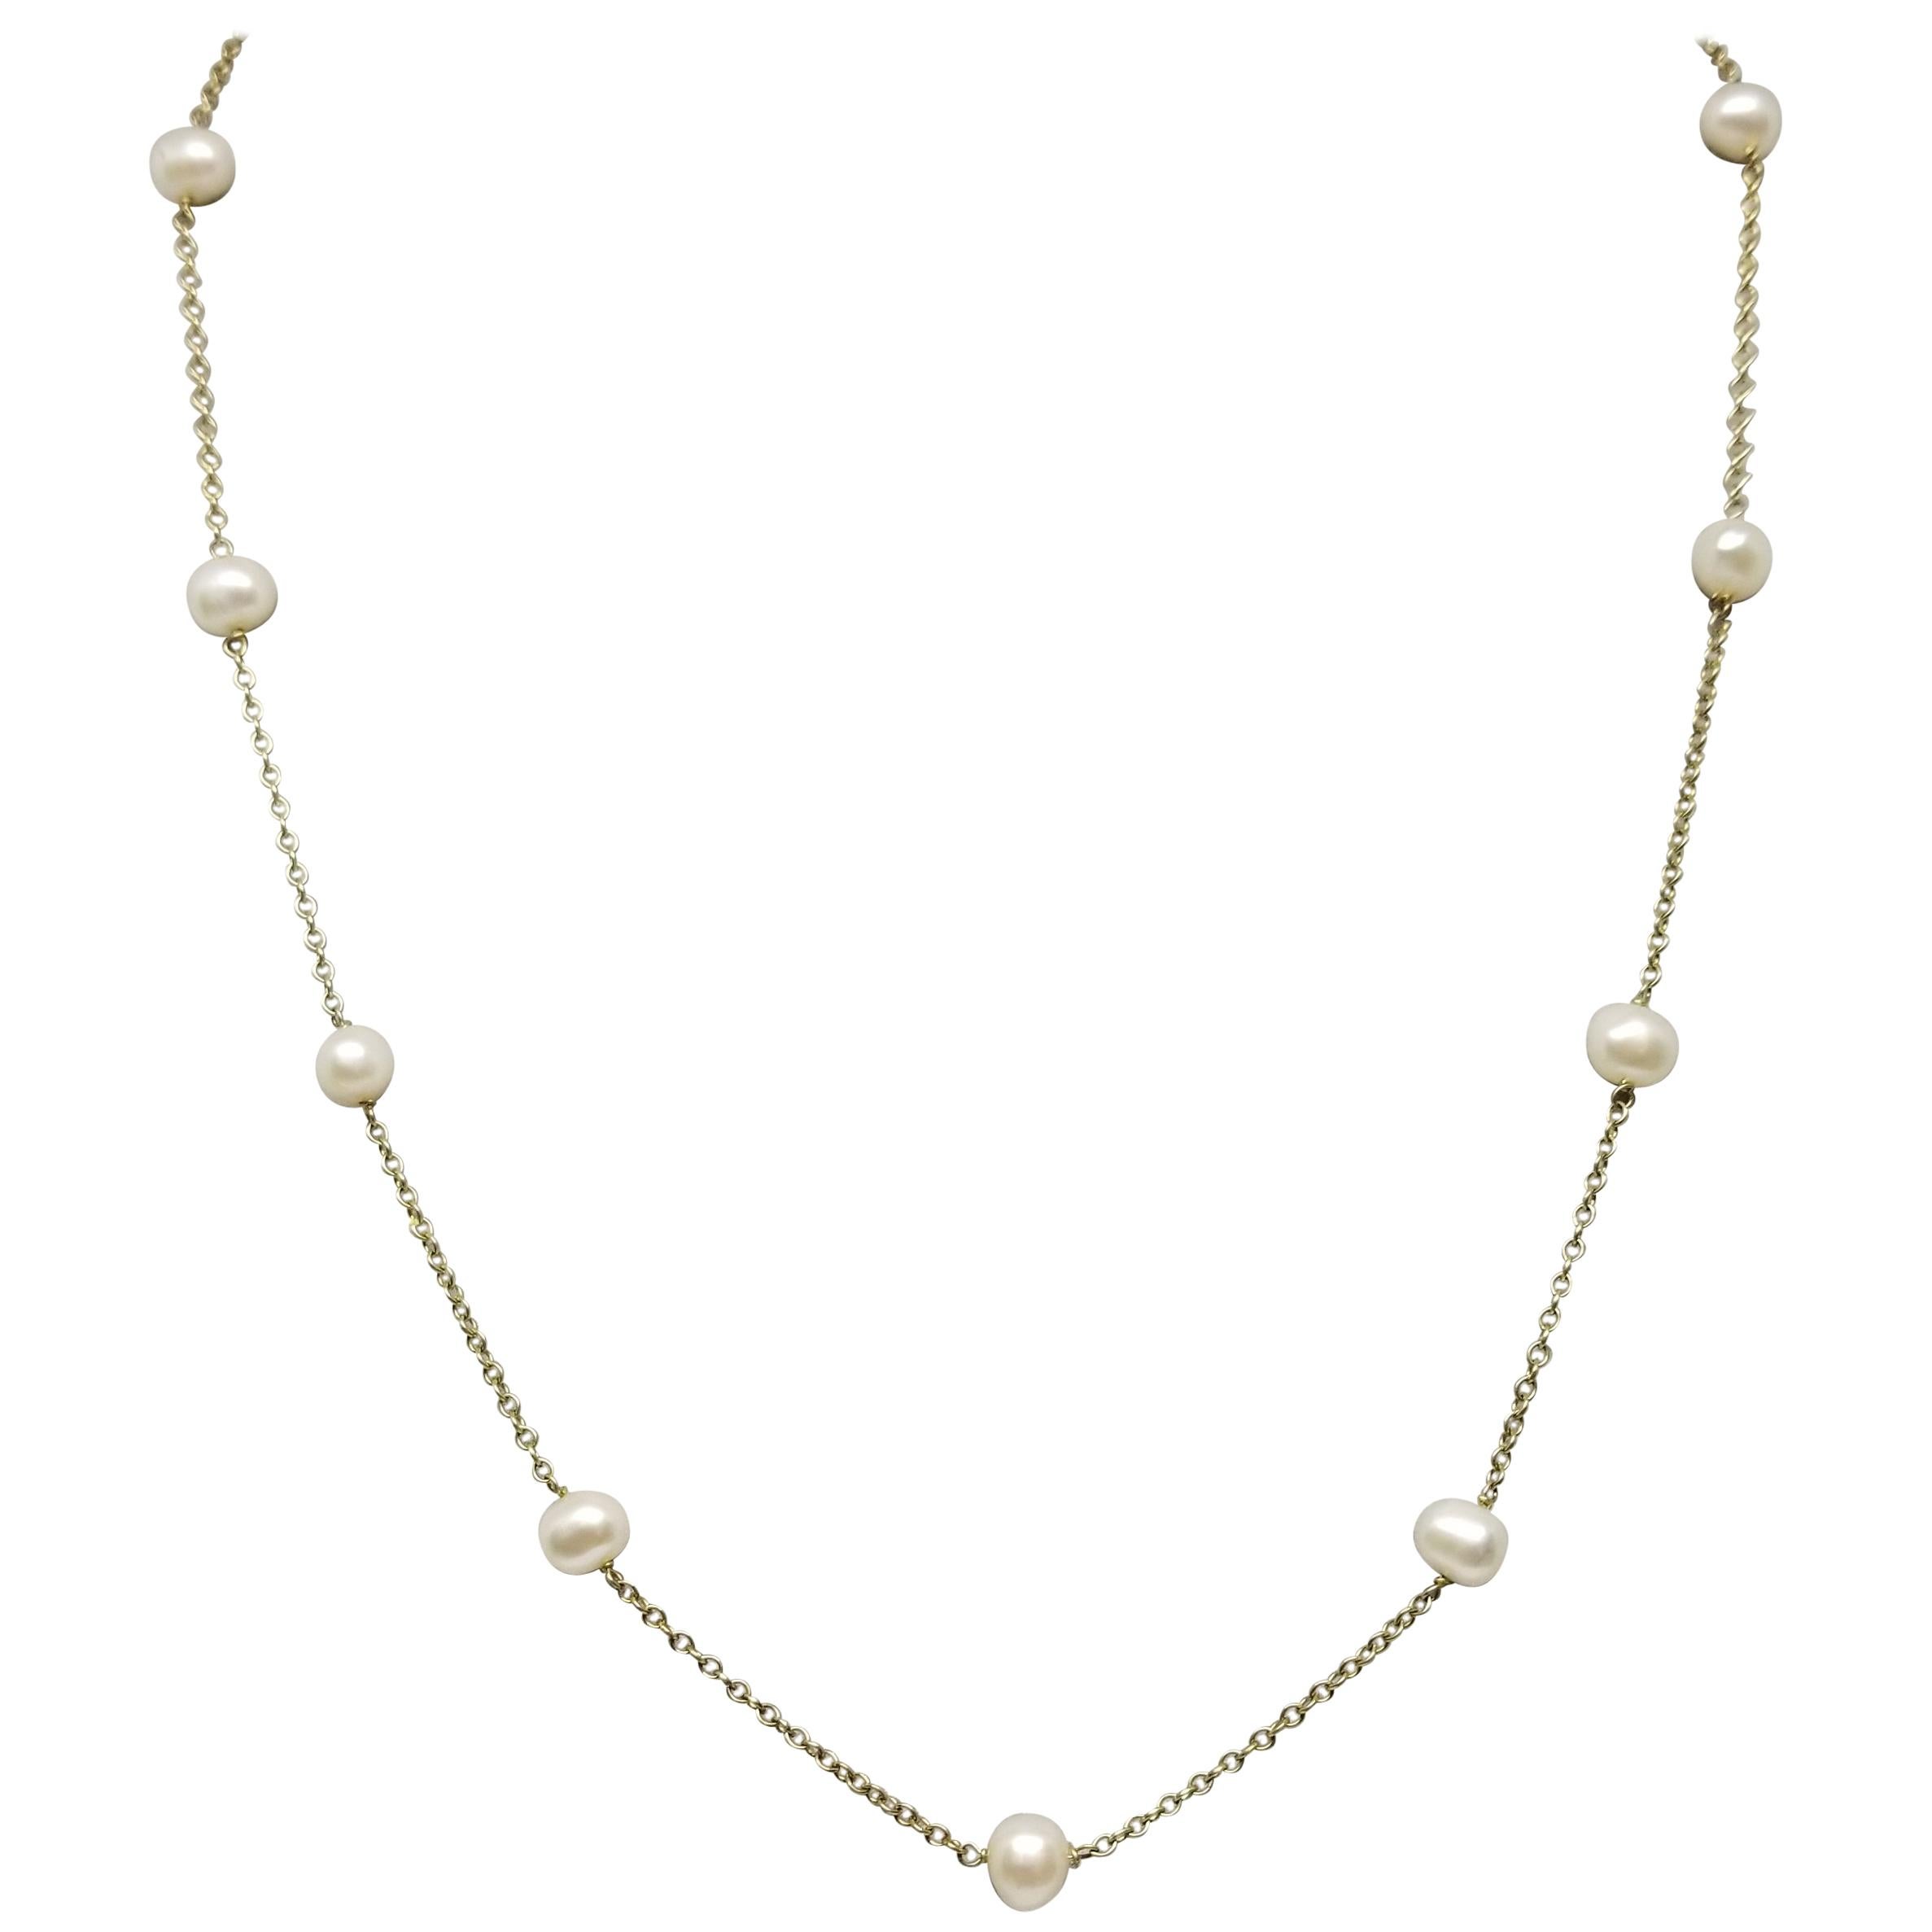 10 Karat "Pearl and Chain" Necklace For Sale